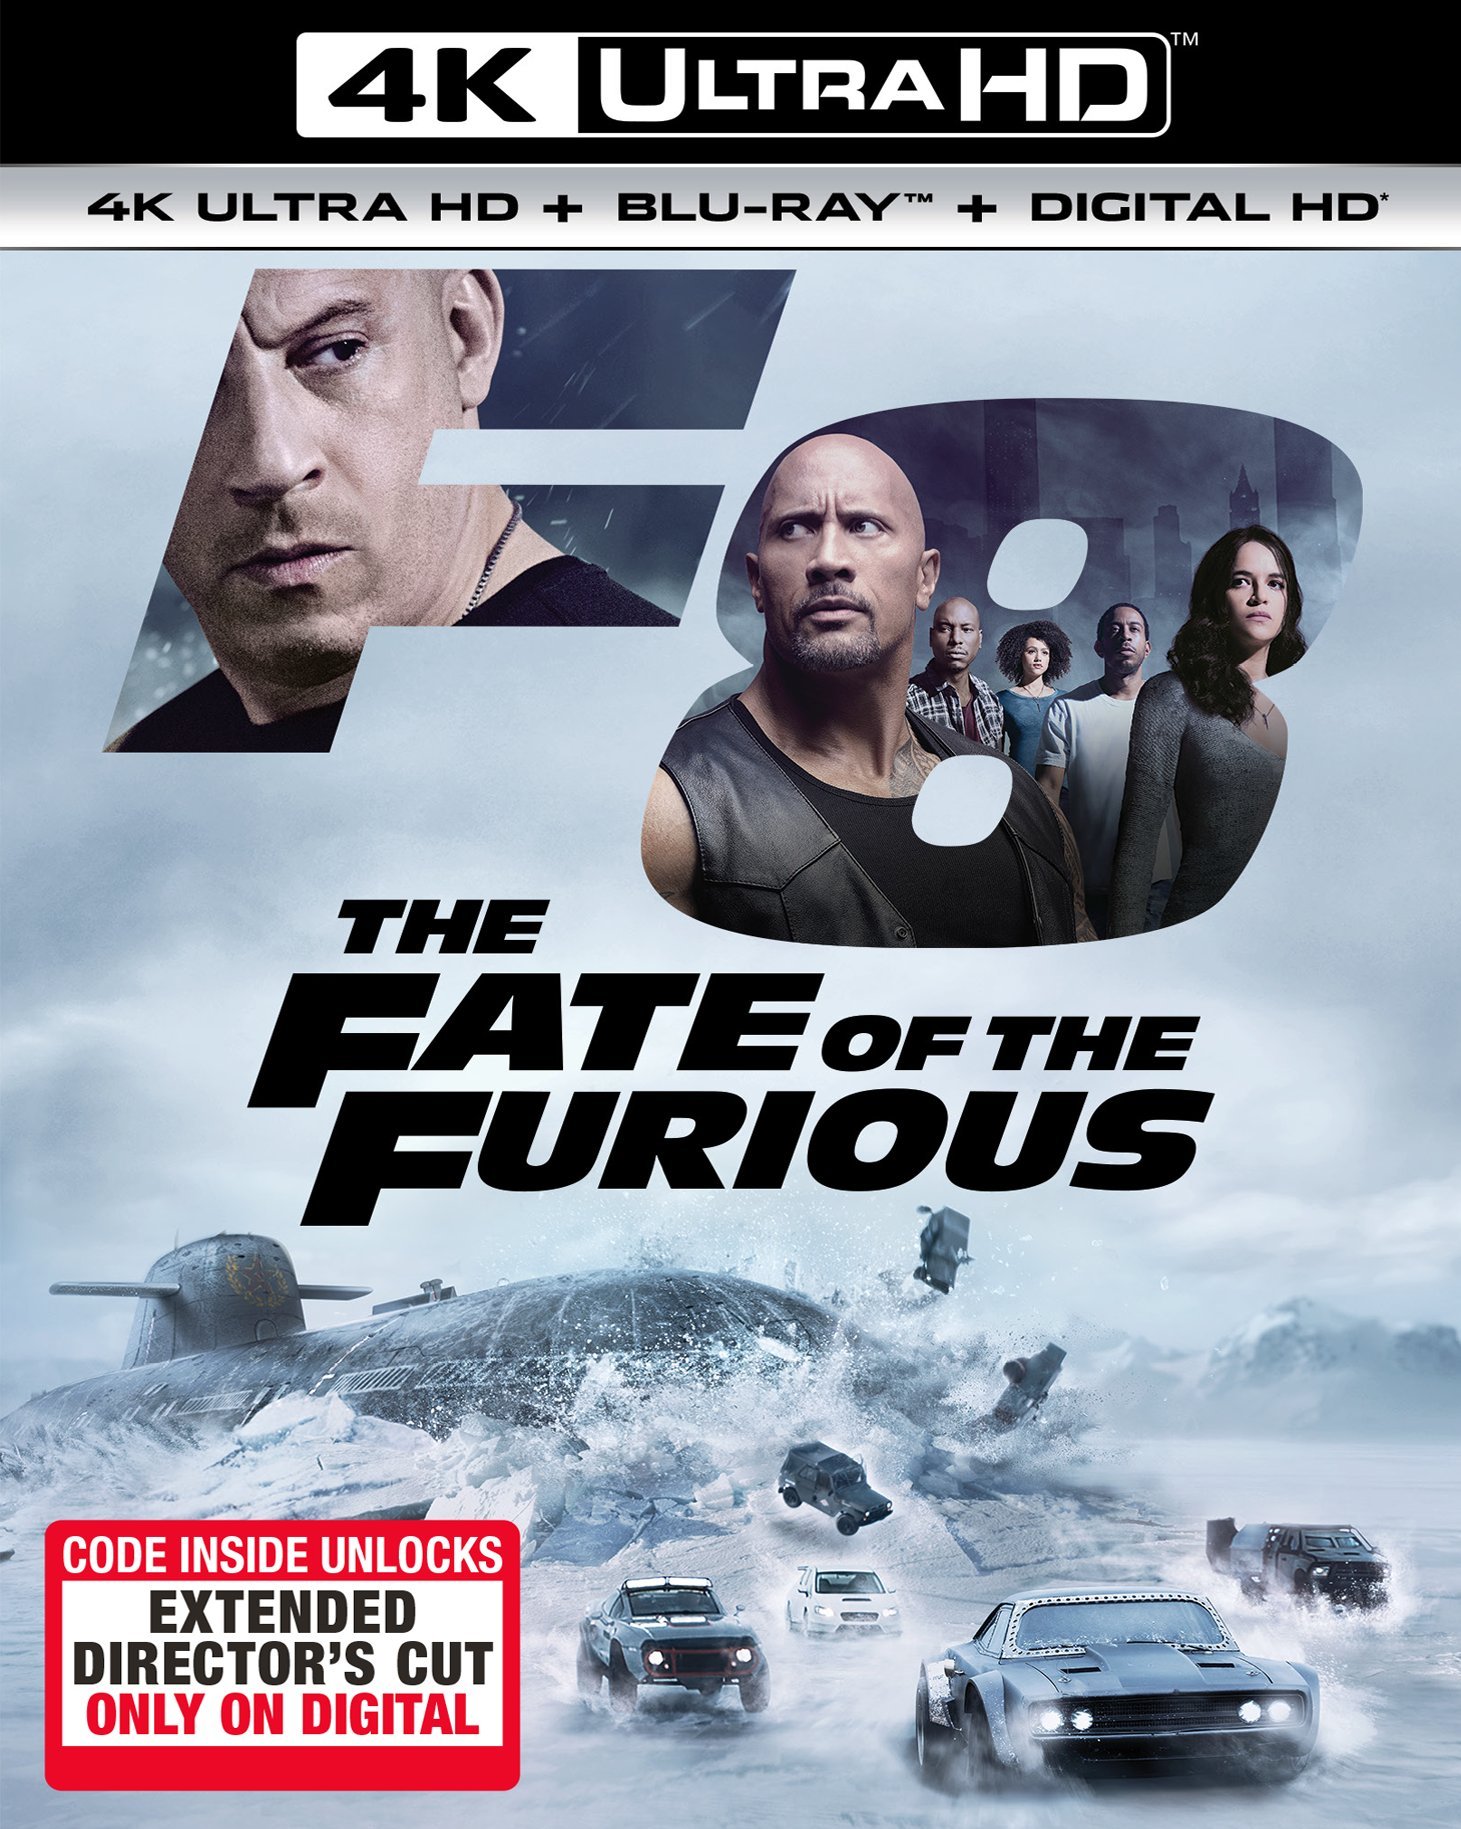 The Fate of the Furious DVD Release Date July 11, 2017